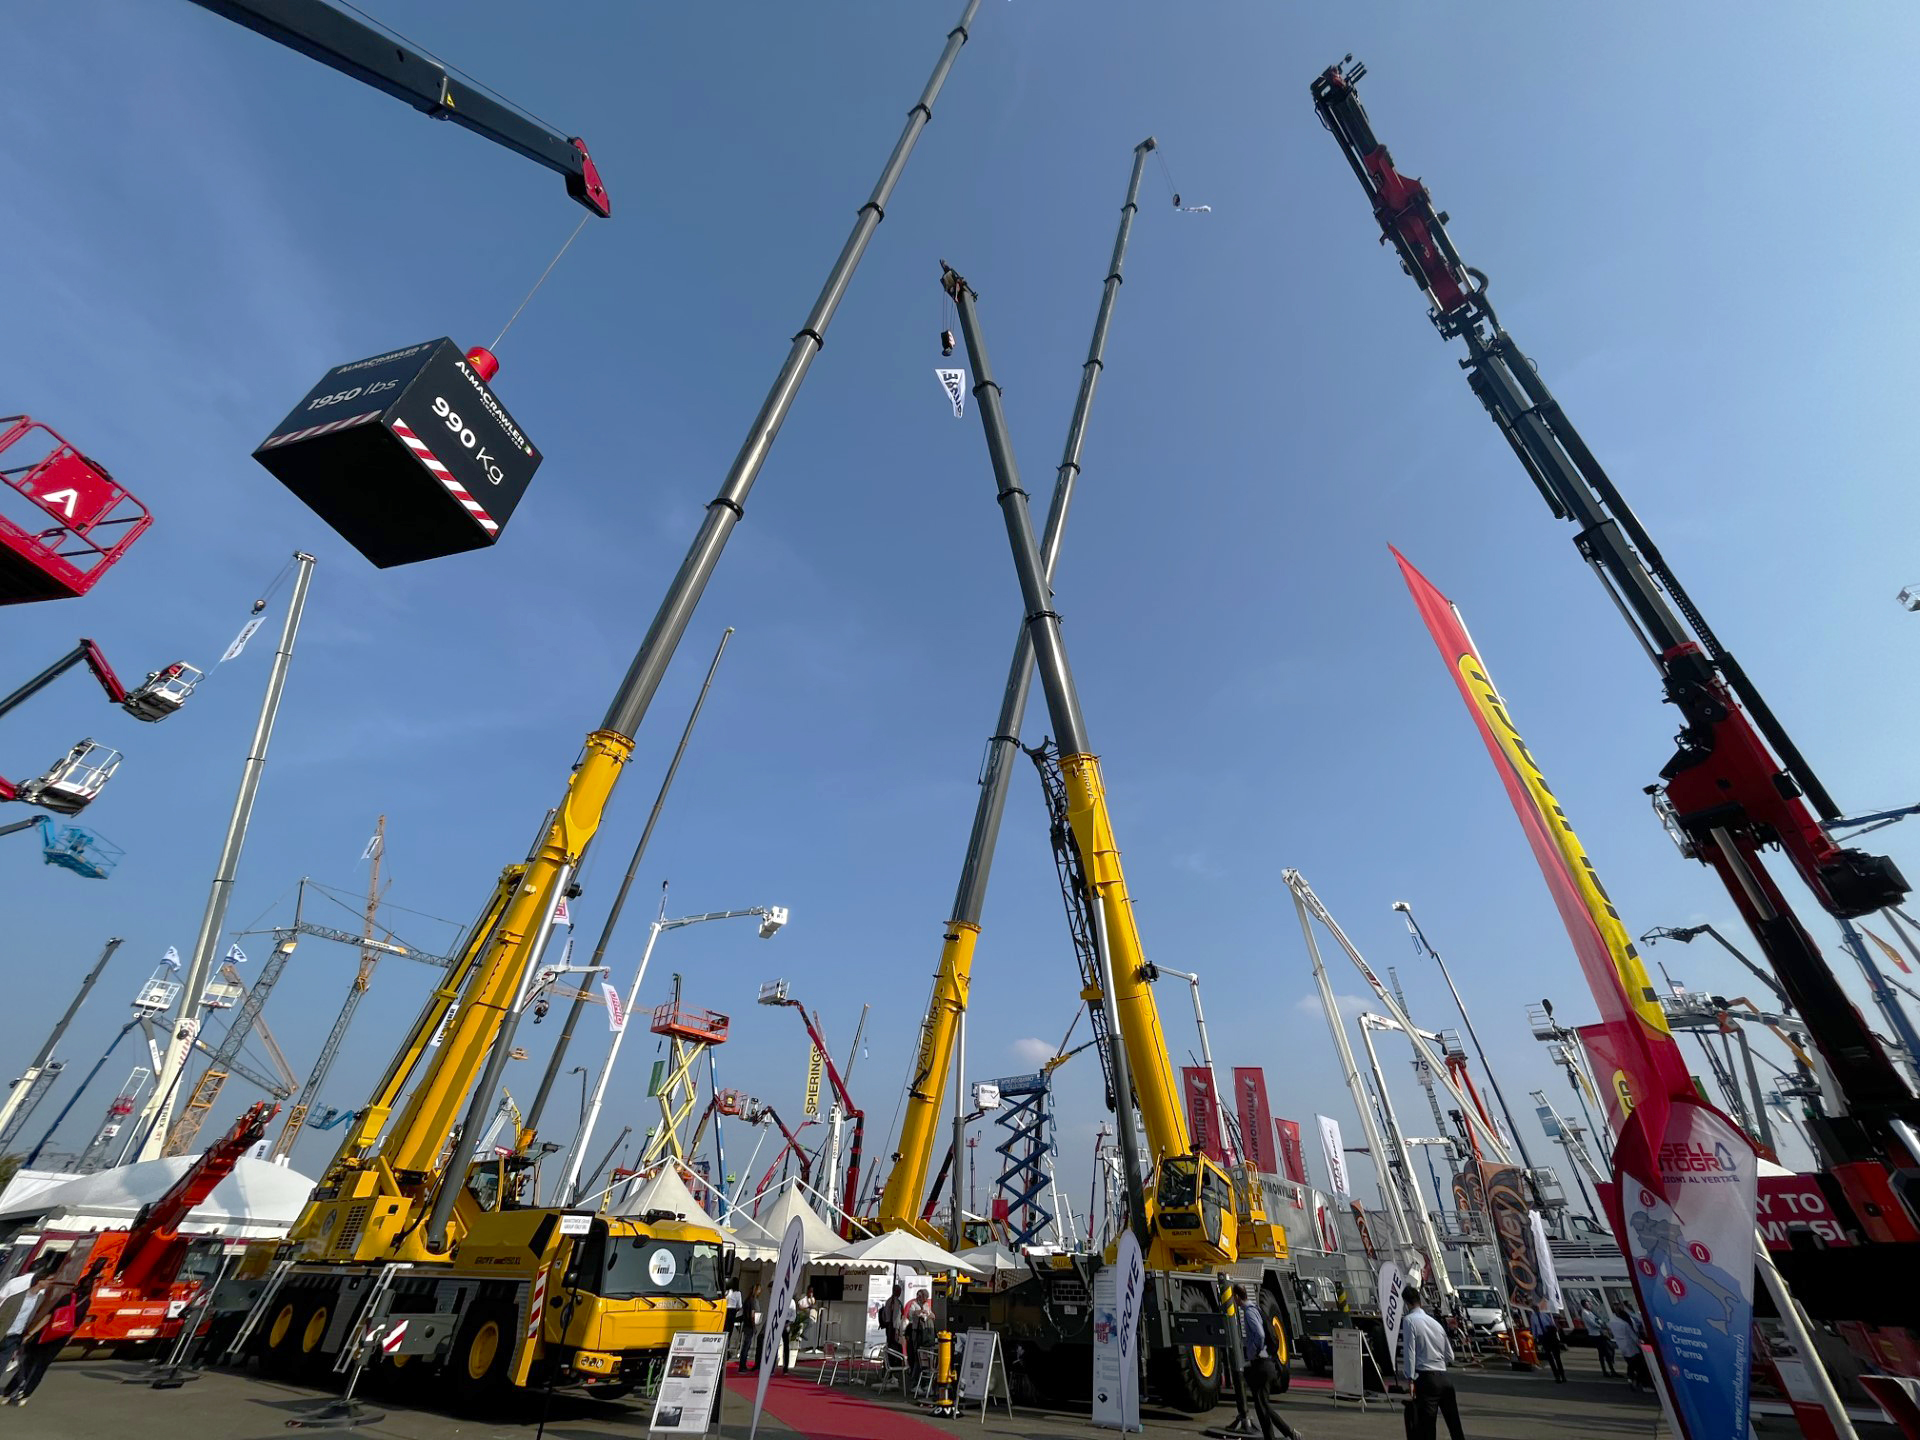 The outdoor area of GIS showcased the latest equipment, including cranes, access platforms and telehandlers.